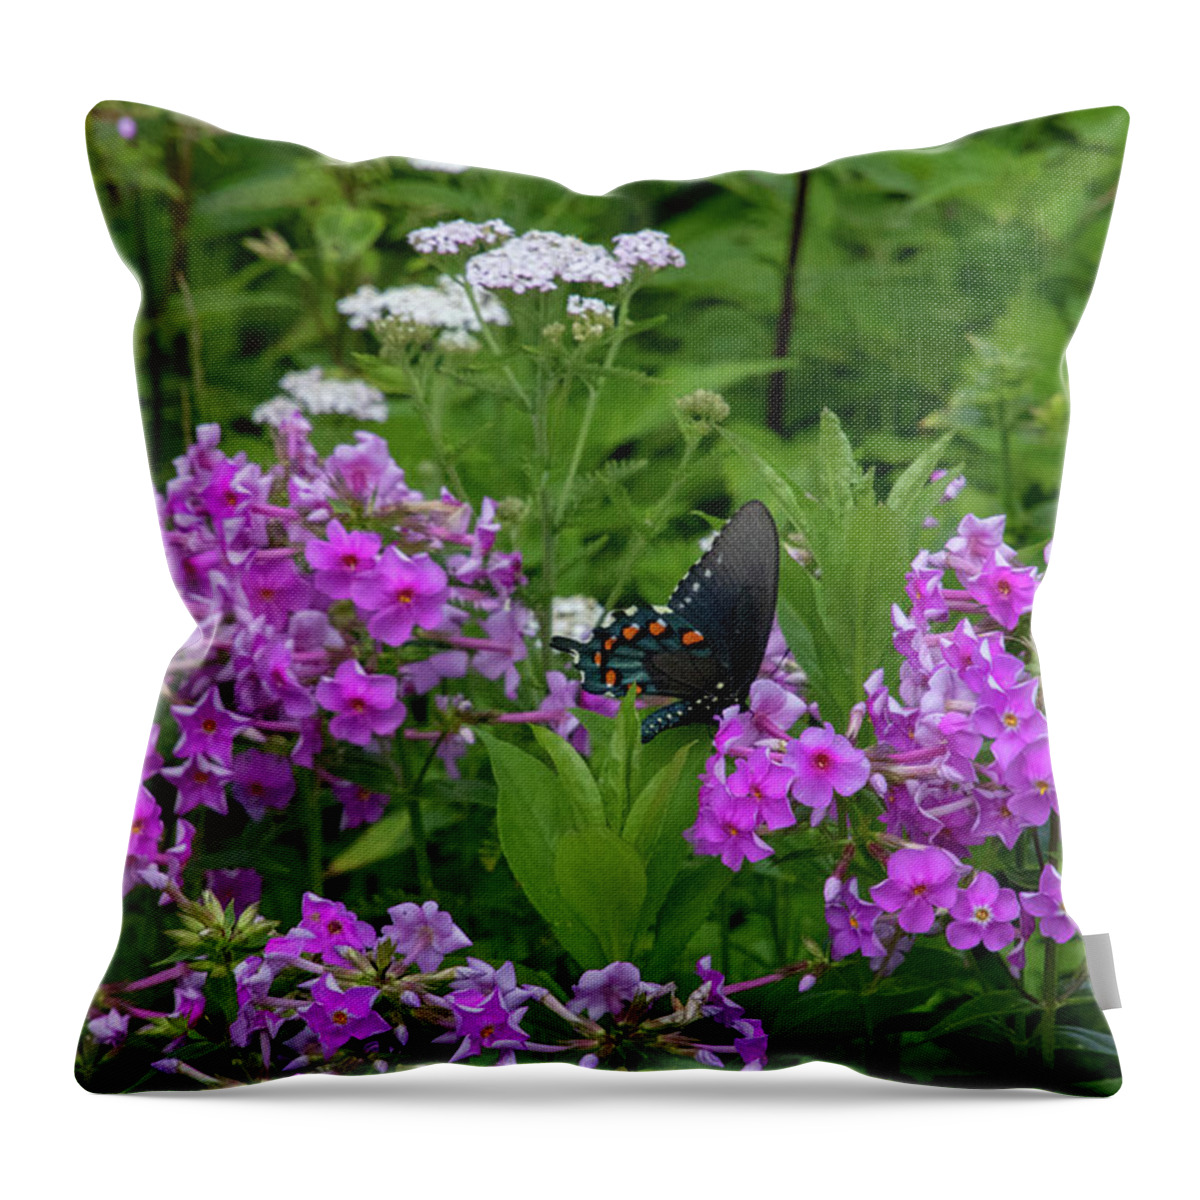 Butterfly Throw Pillow featuring the photograph Swallowtail Butterfly by Natural Vista Photo